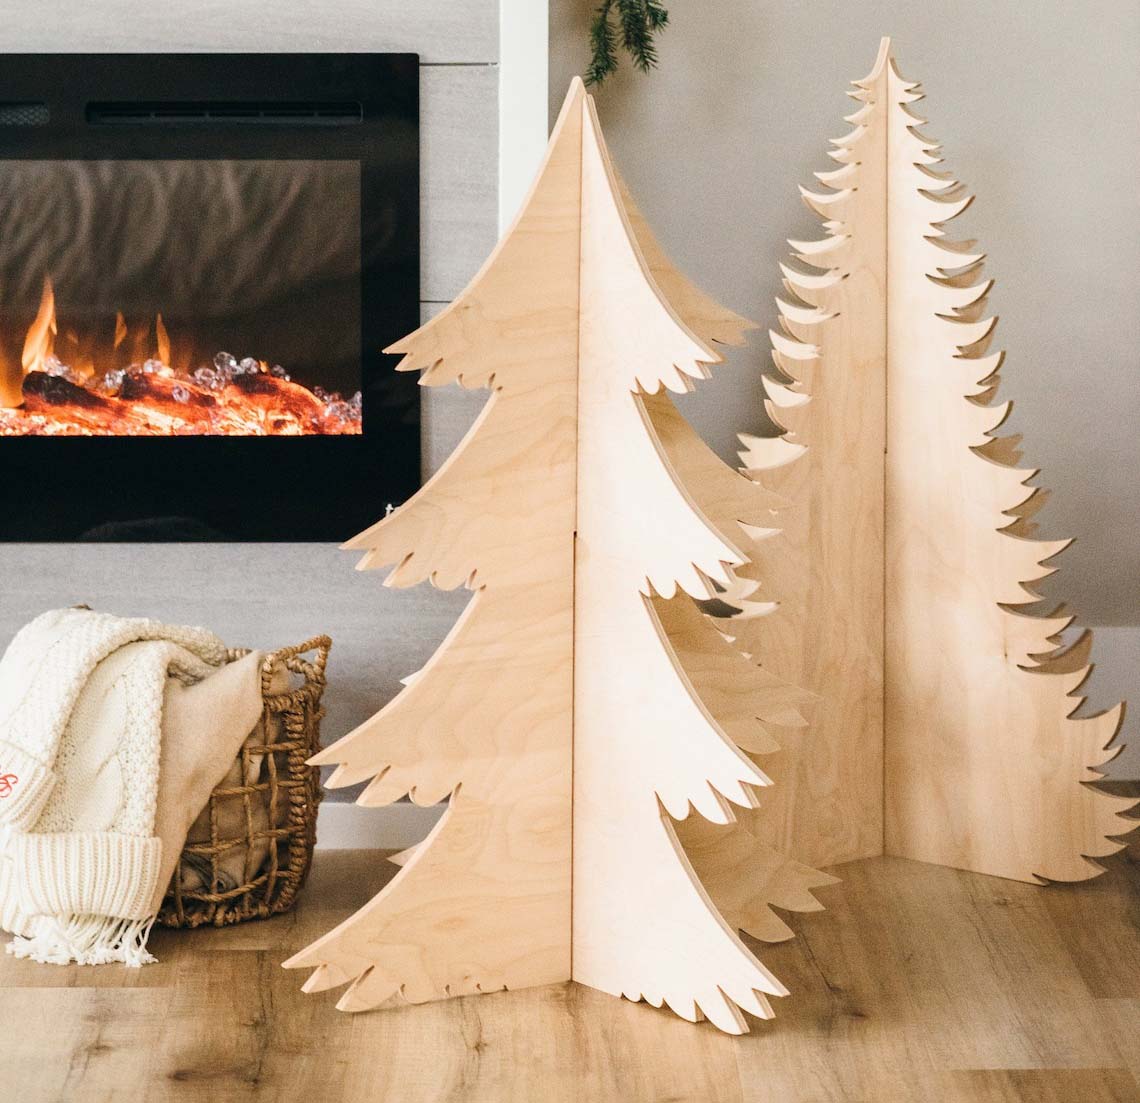 Black Friday Deals on Unique Home Decor Finds Option Wooden Christmas Trees